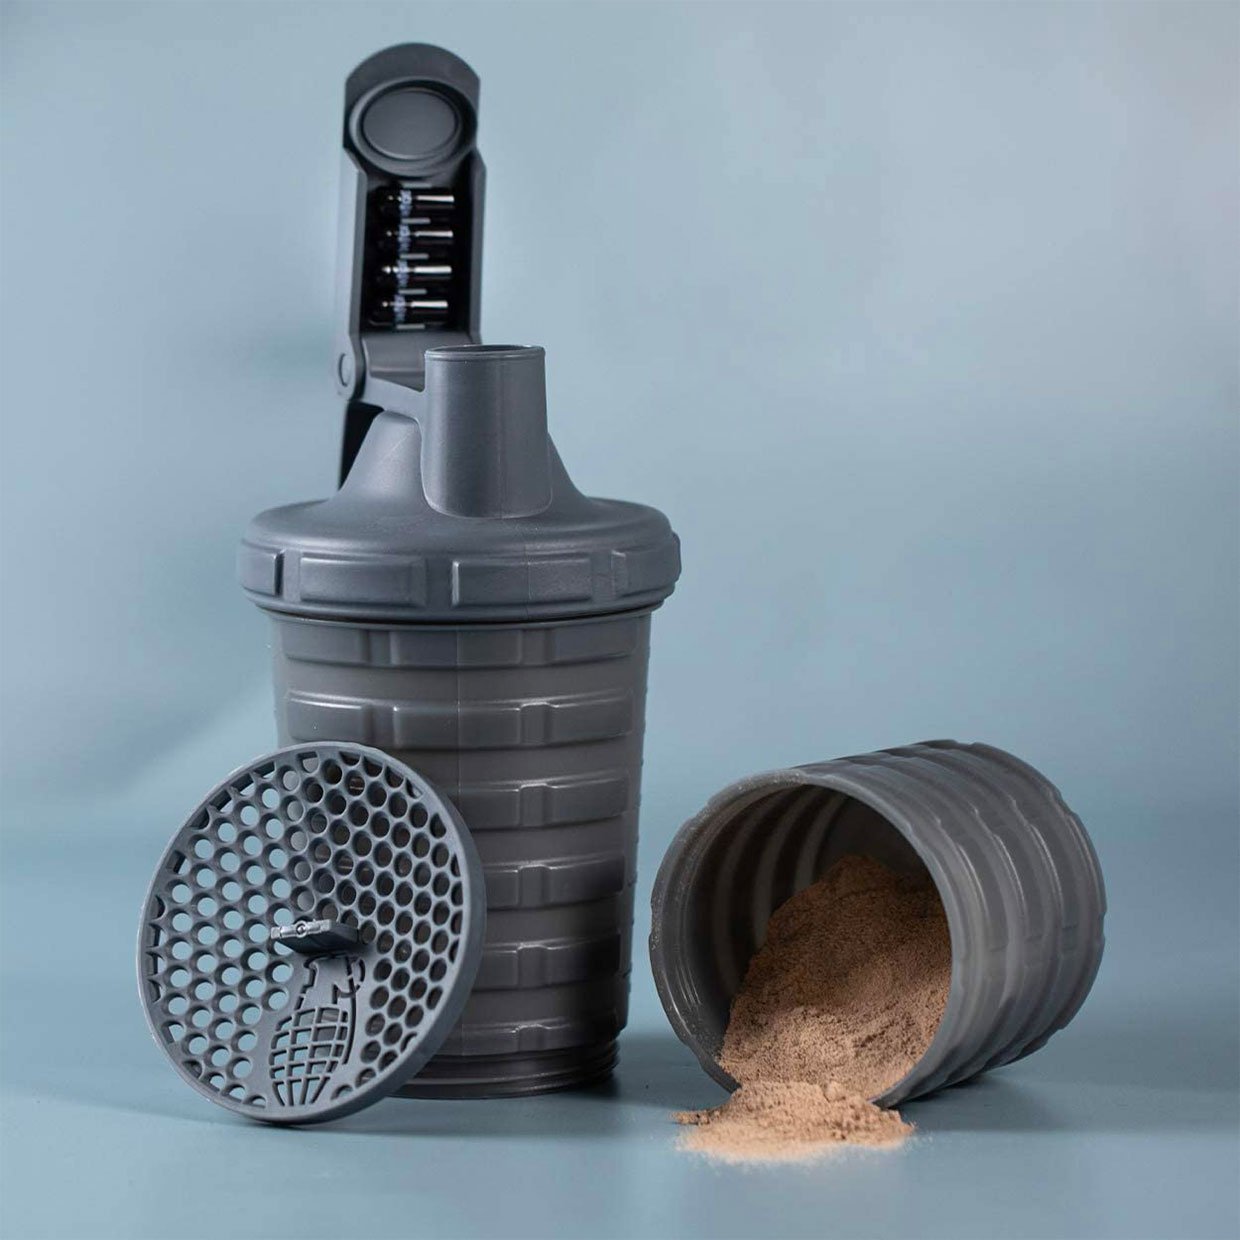 This Grenade Shaker Bottle Makes You Look Even Tougher at the Gym